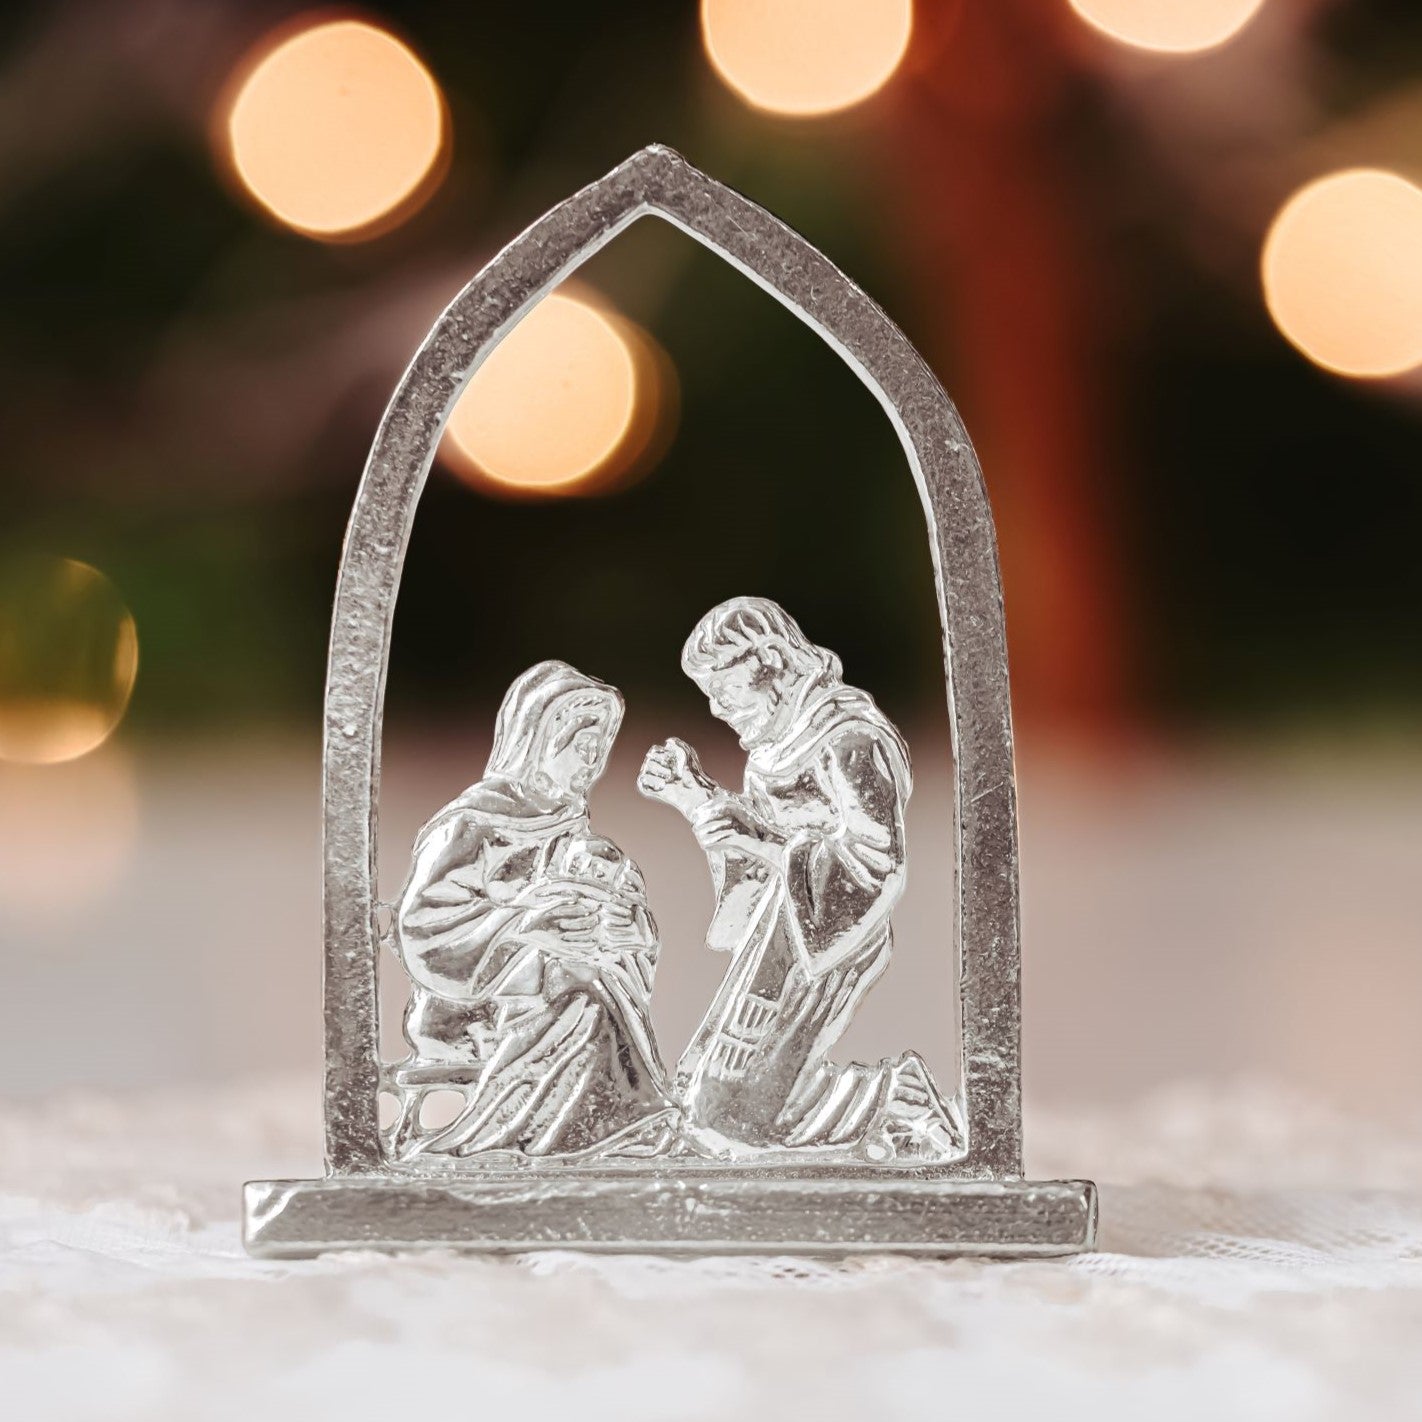 Manger with Baby Jesus Gift Ideas